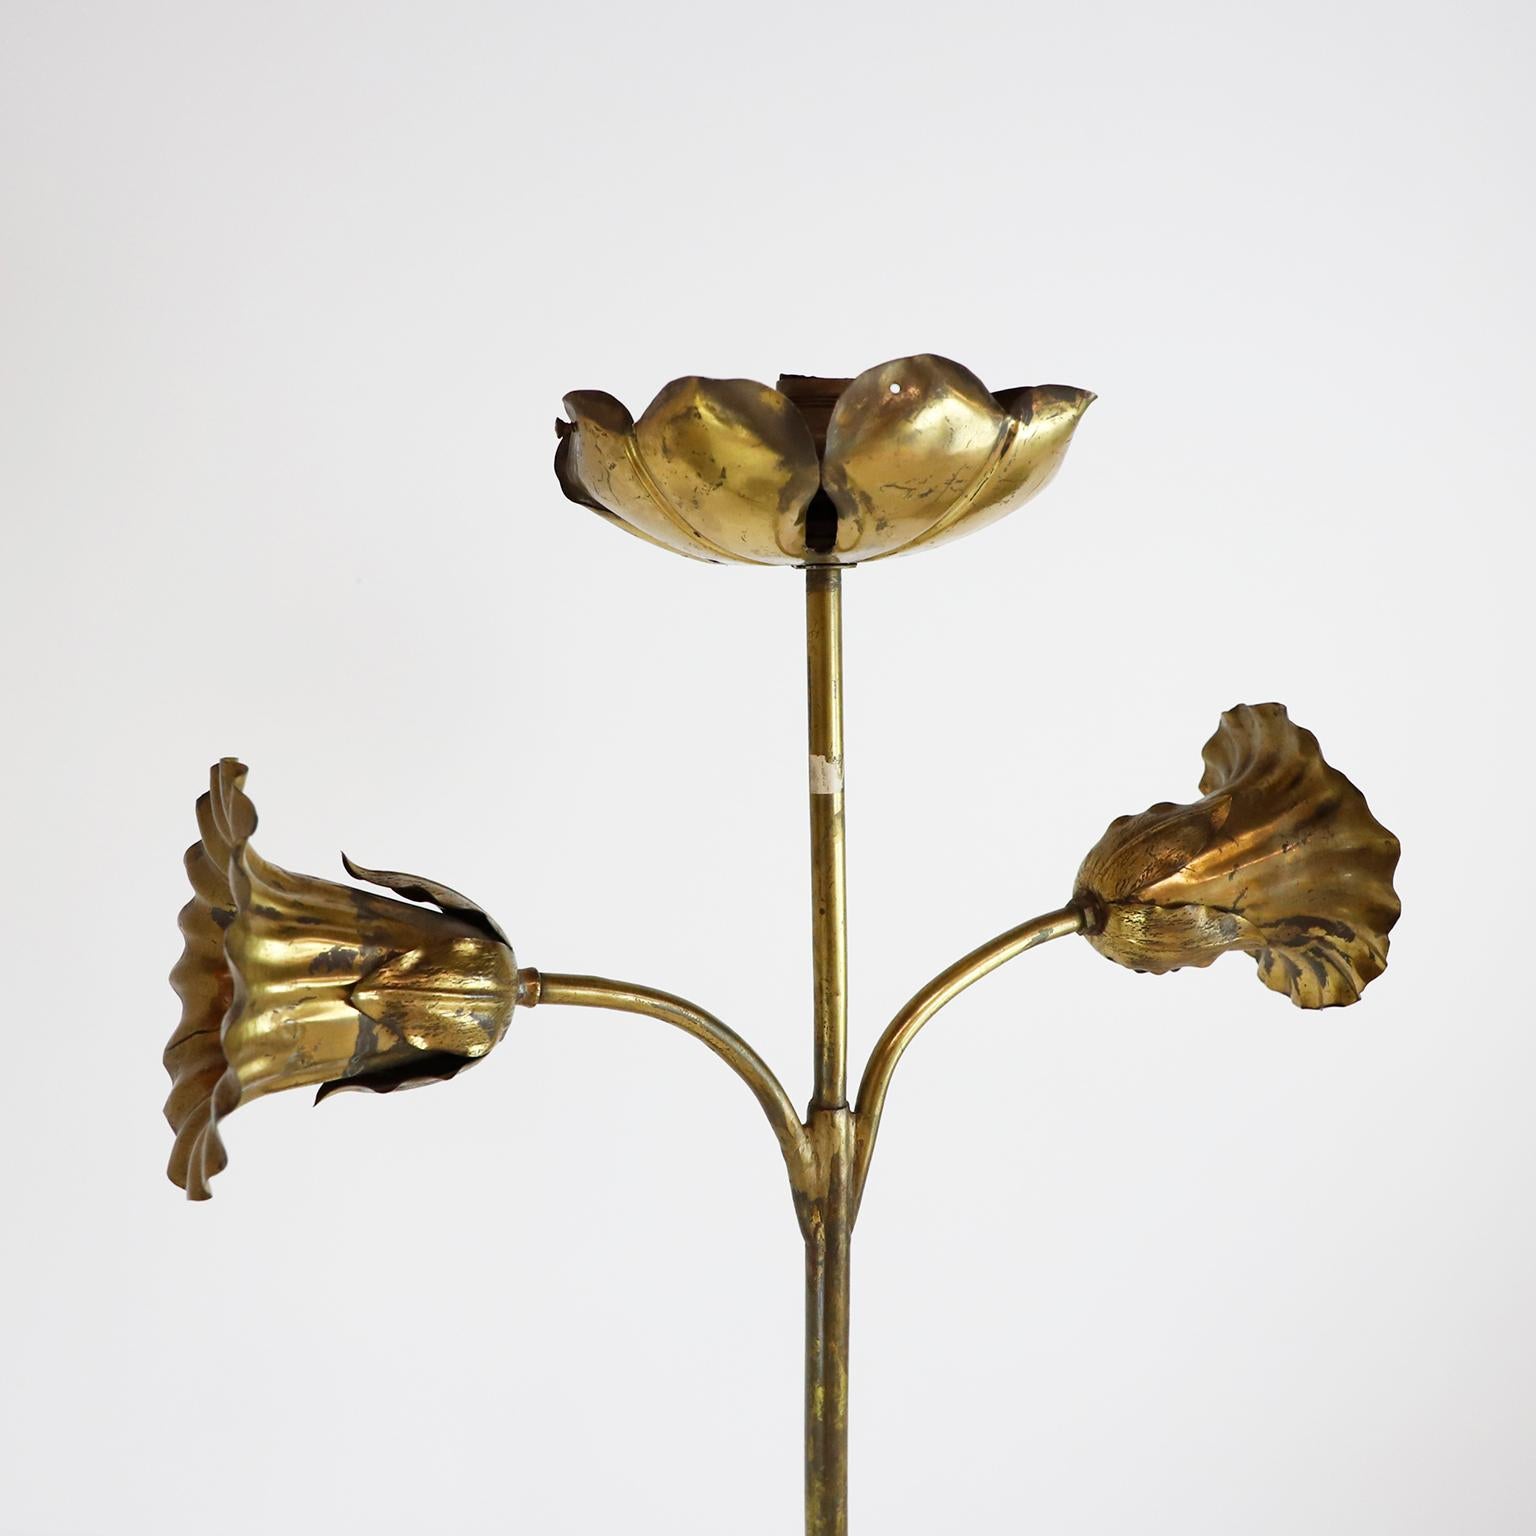 We offer this rare Art Nouveau leaves floor lamp, early 20th century made in brass.